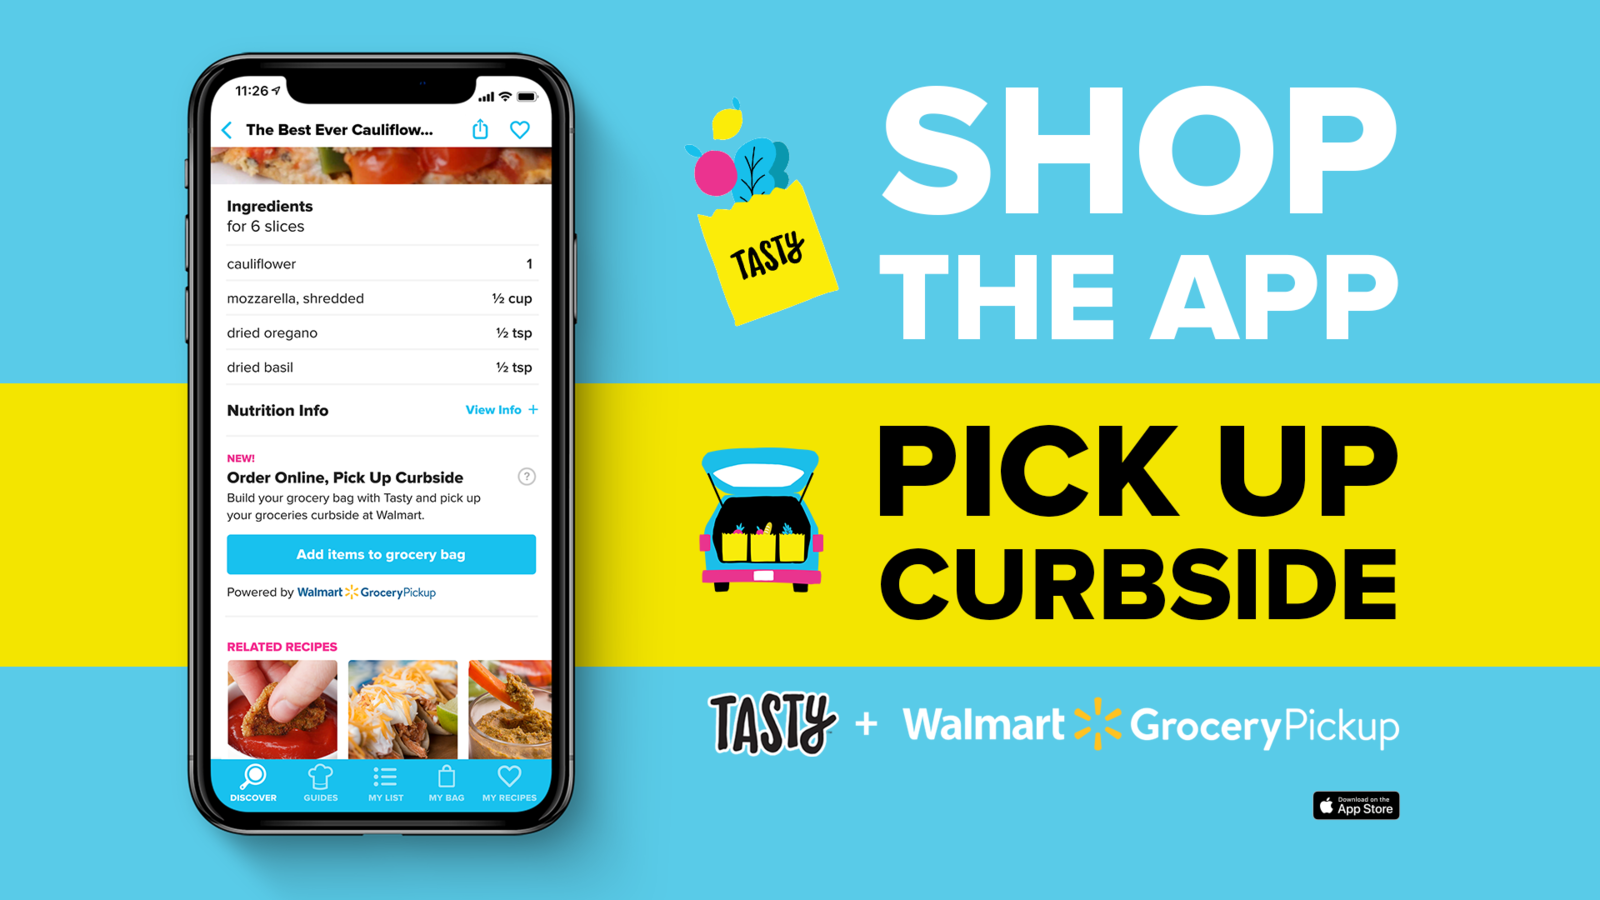 Ad with &quot;Tasty+ Walmart Grocery Pickup&quot; logos; phone screen shows recipe, with &quot;Pick Up Curbside&quot; text